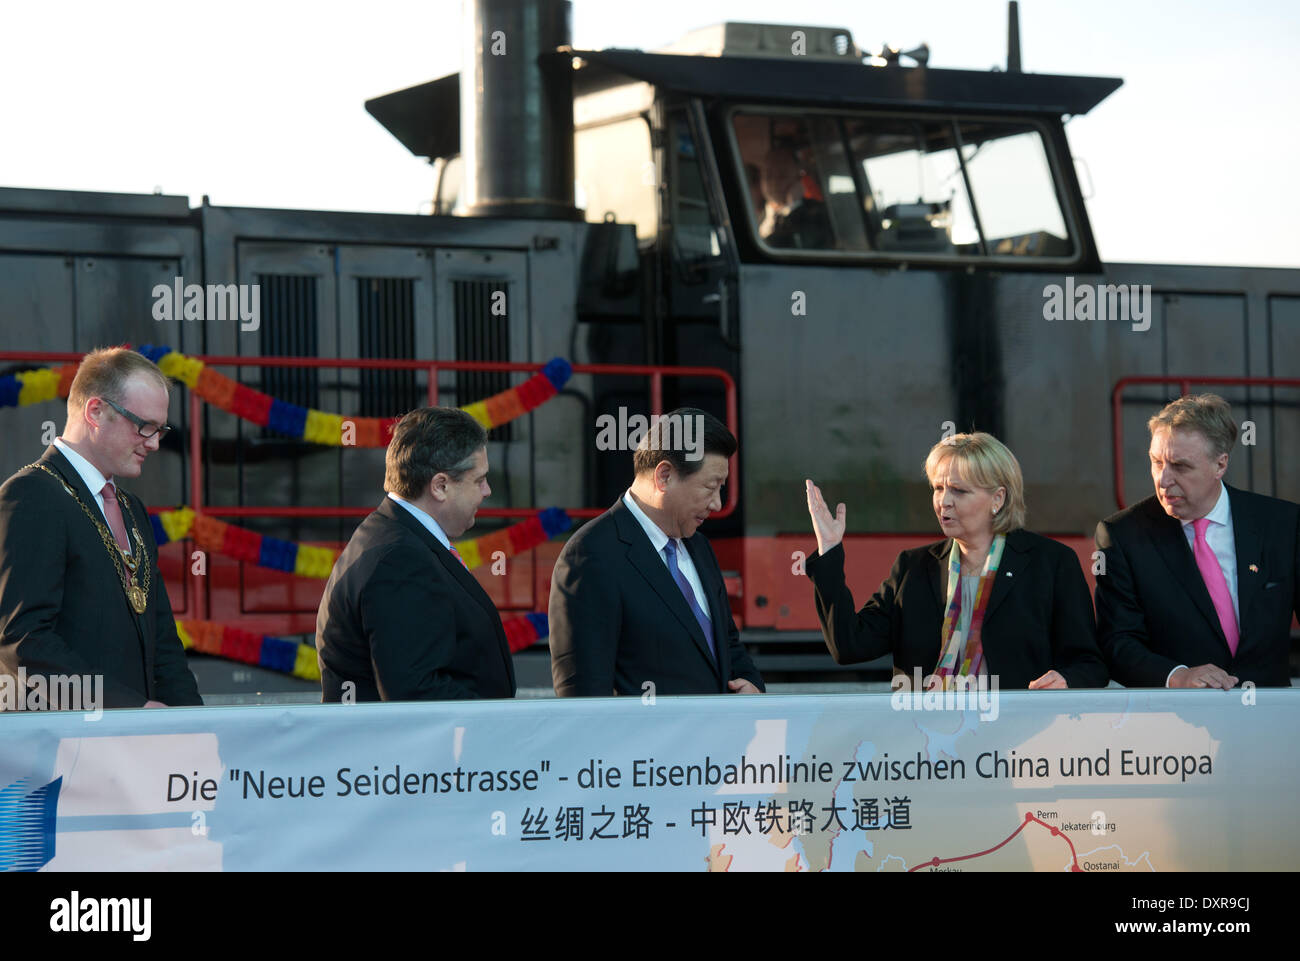 Duisburg, Germany. 29th Mar, 2014. China's president Xi Jinping (C) stands between Duisburg's mayor Soeren Link, German Minister of Economics and Energy Sigmar Gabriel (SPD), governor of North Rhine-Westphalia Hannelore Kraft and head of Duisburg's harbour Logport Erich Staake (L-R) in front of the train 'Yuxinou' in Duisburg, Germany, 29 March 2014. Xi proceeds his tour of Germany in North Rhine-Westphalia. Photo: Bernd Thissen/dpa/Alamy Live News Stock Photo